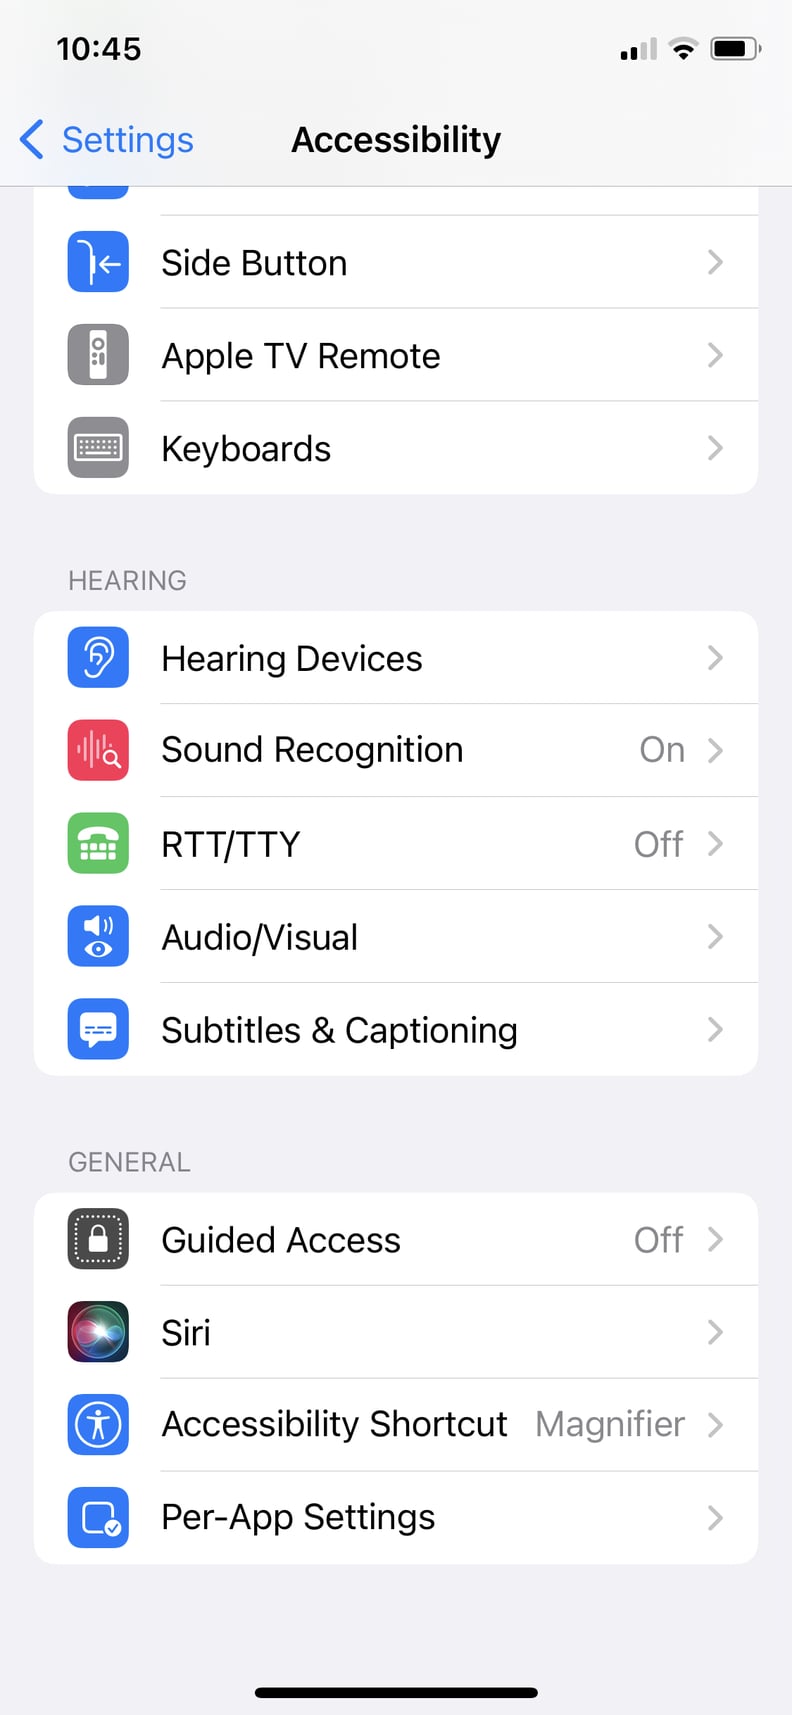 Under the Accessibility Tab, Select "Sound Recognition"